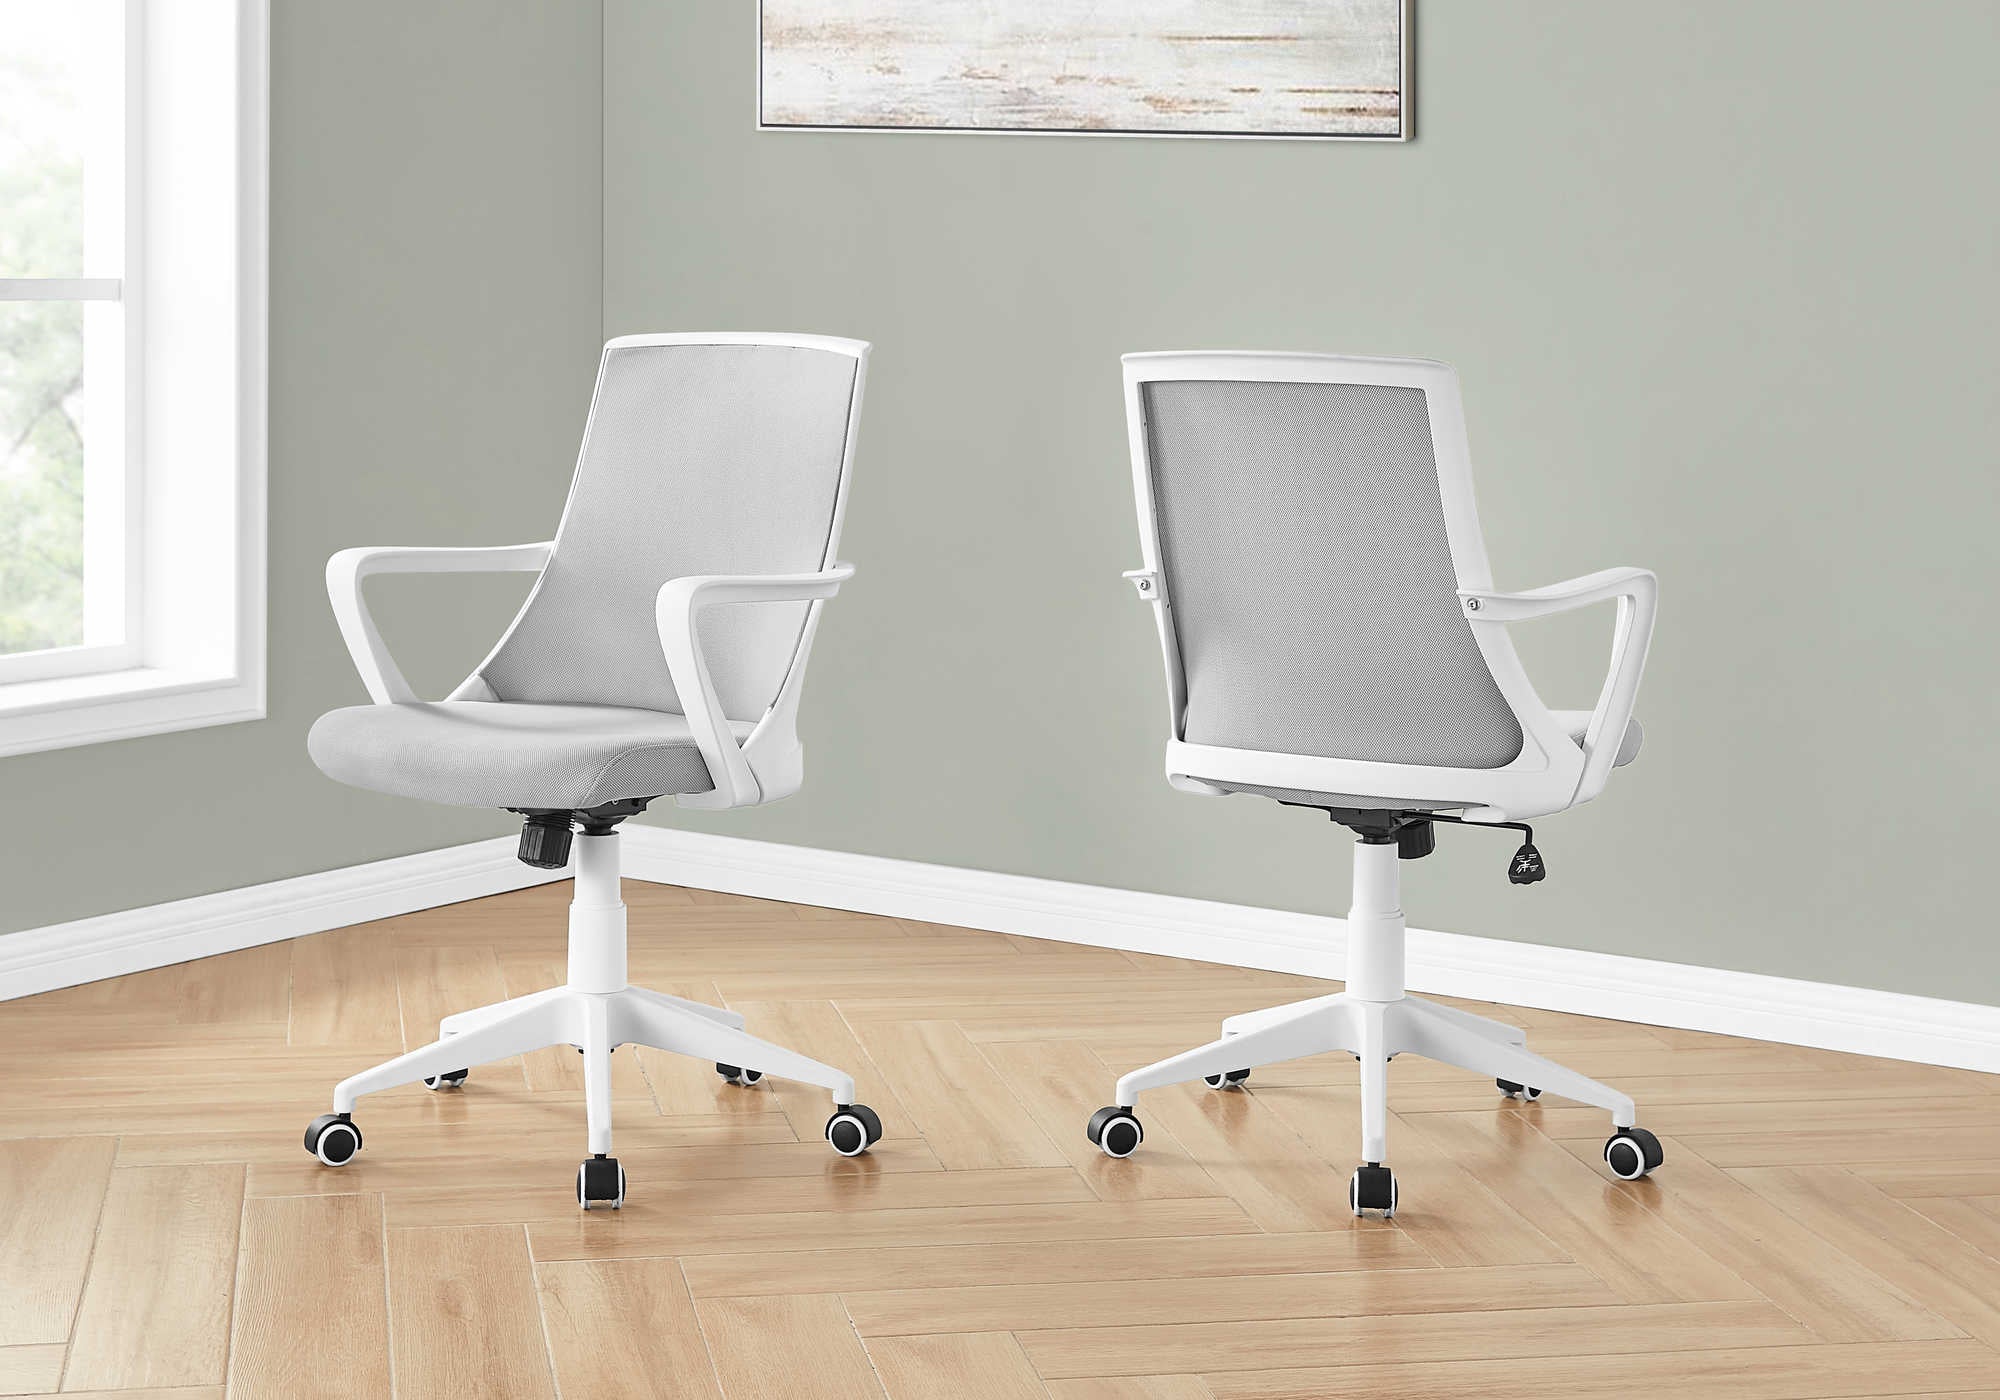 OFFICE CHAIR - WHITE  GREY MESH  MULTI POSITION